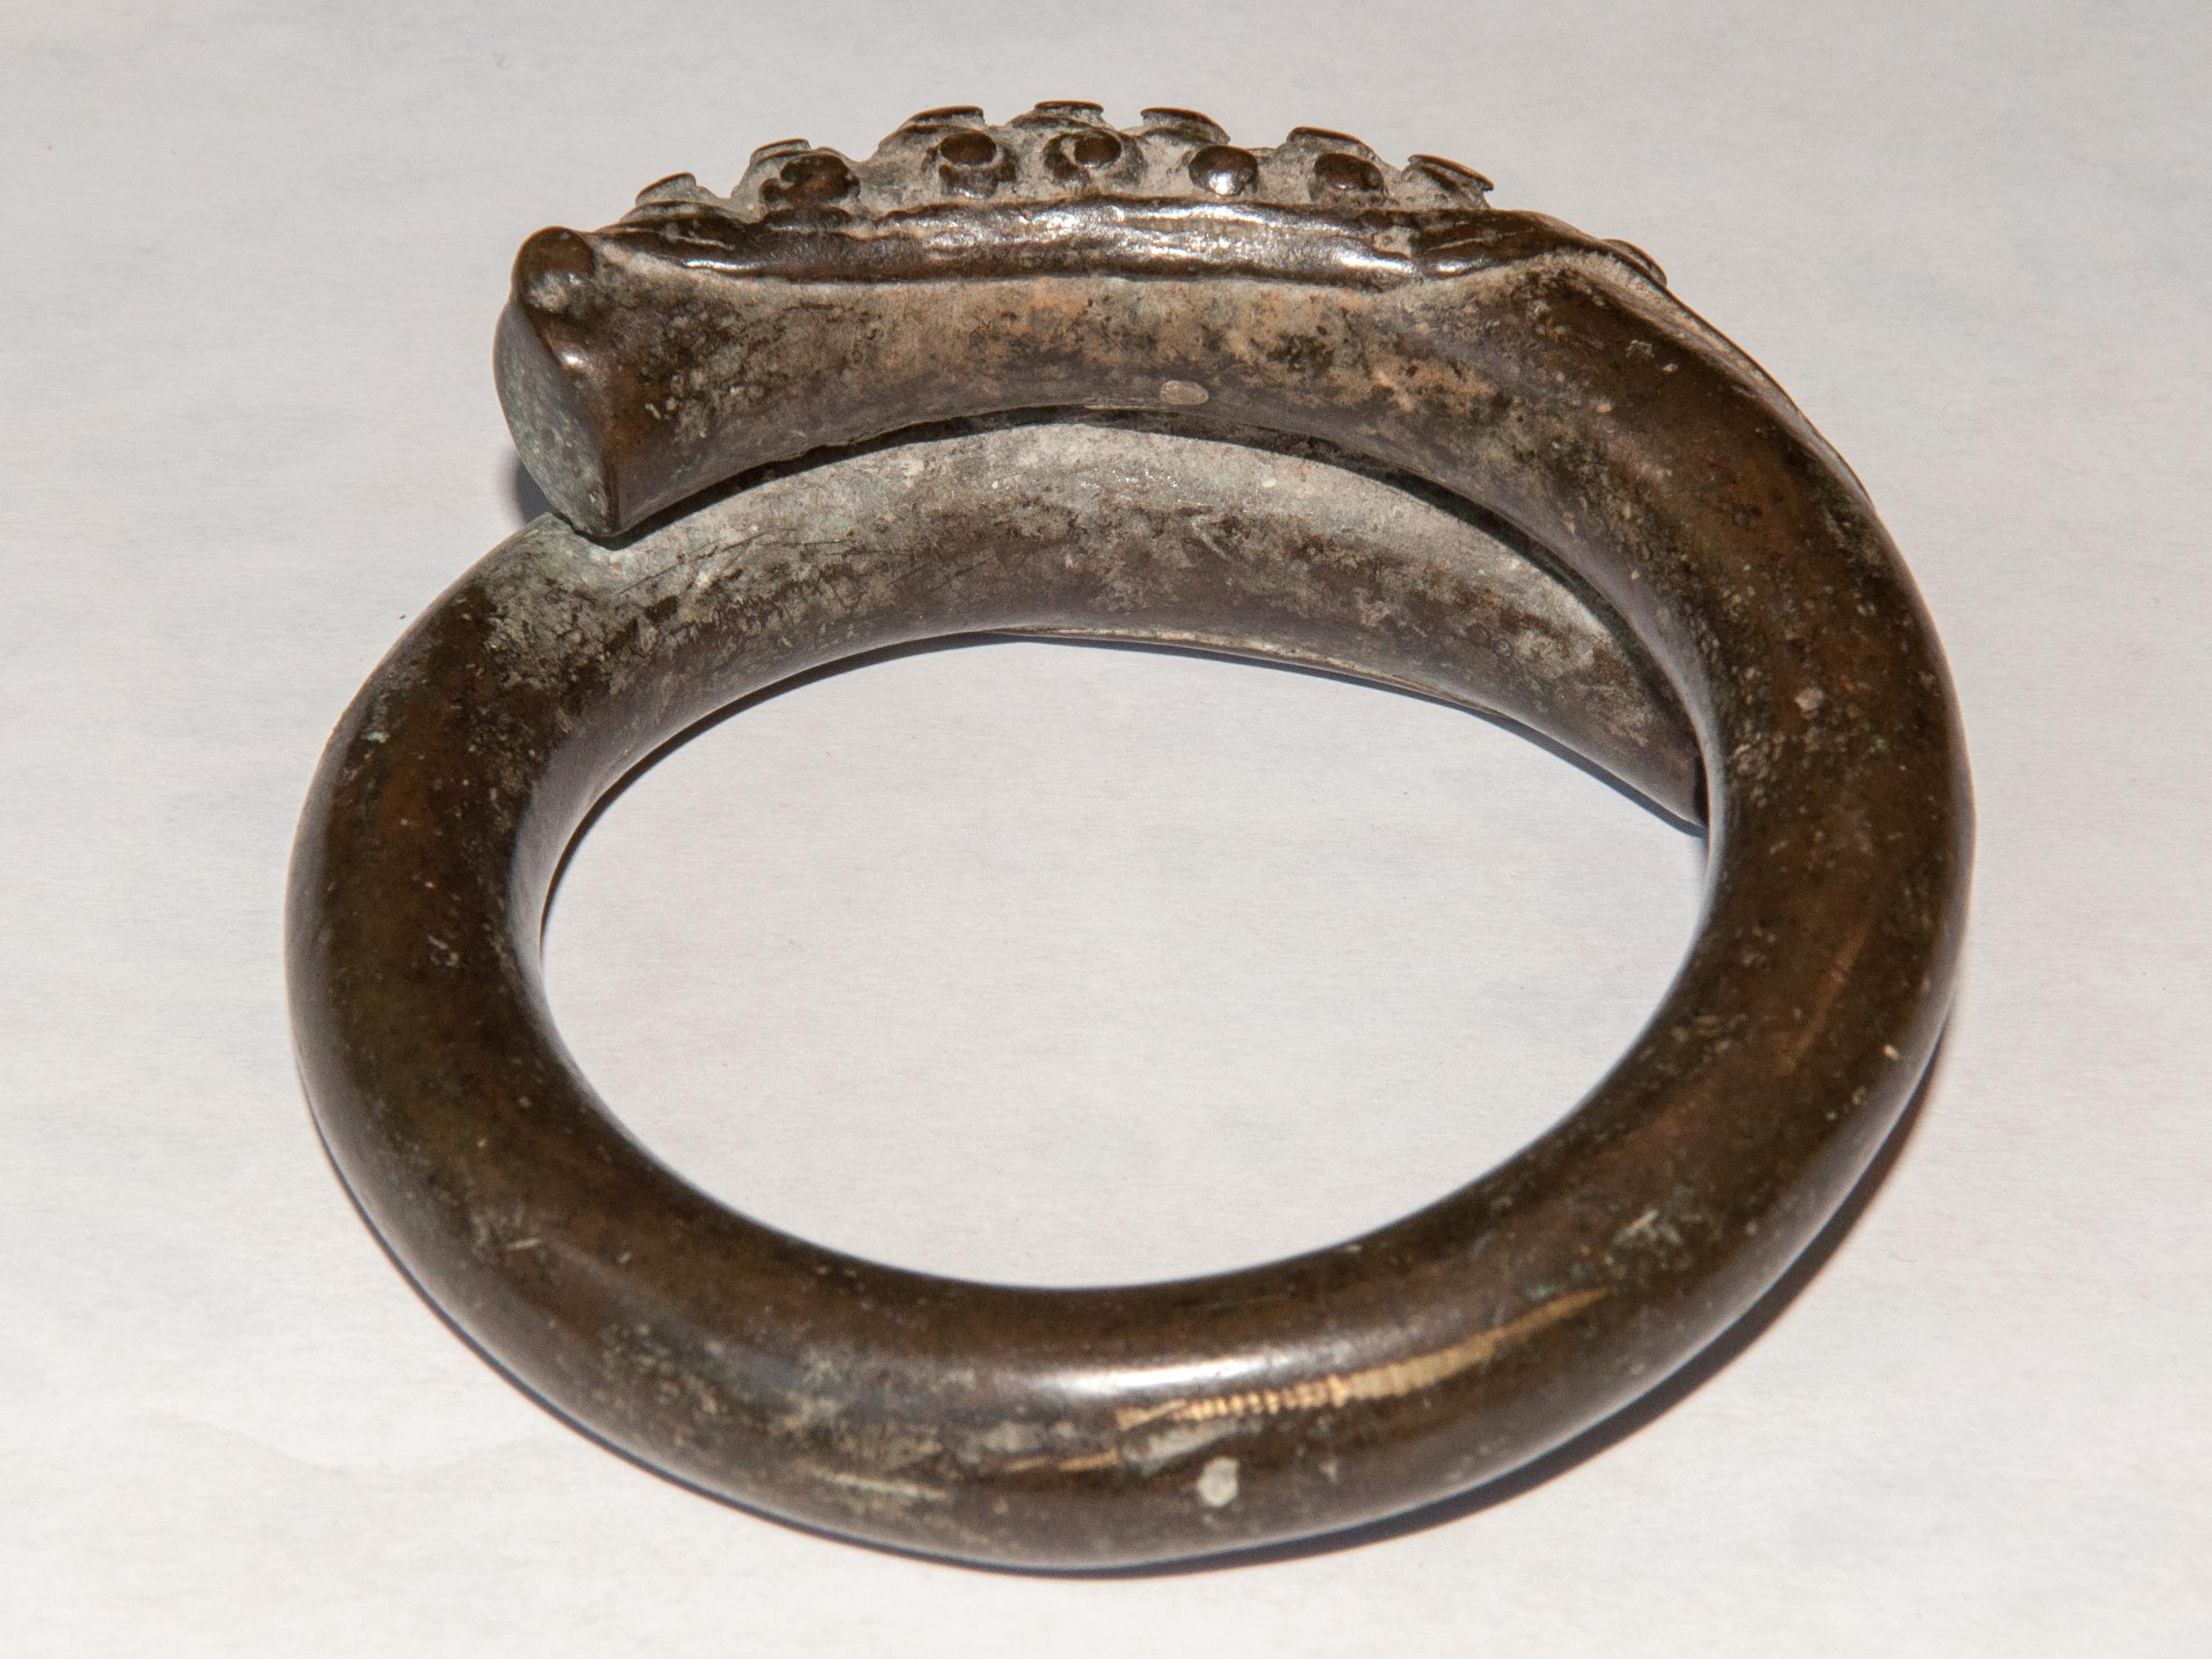 Antique Bronze Bracelet from Laos with a Naga or Serpent Motif, 18th Century 1